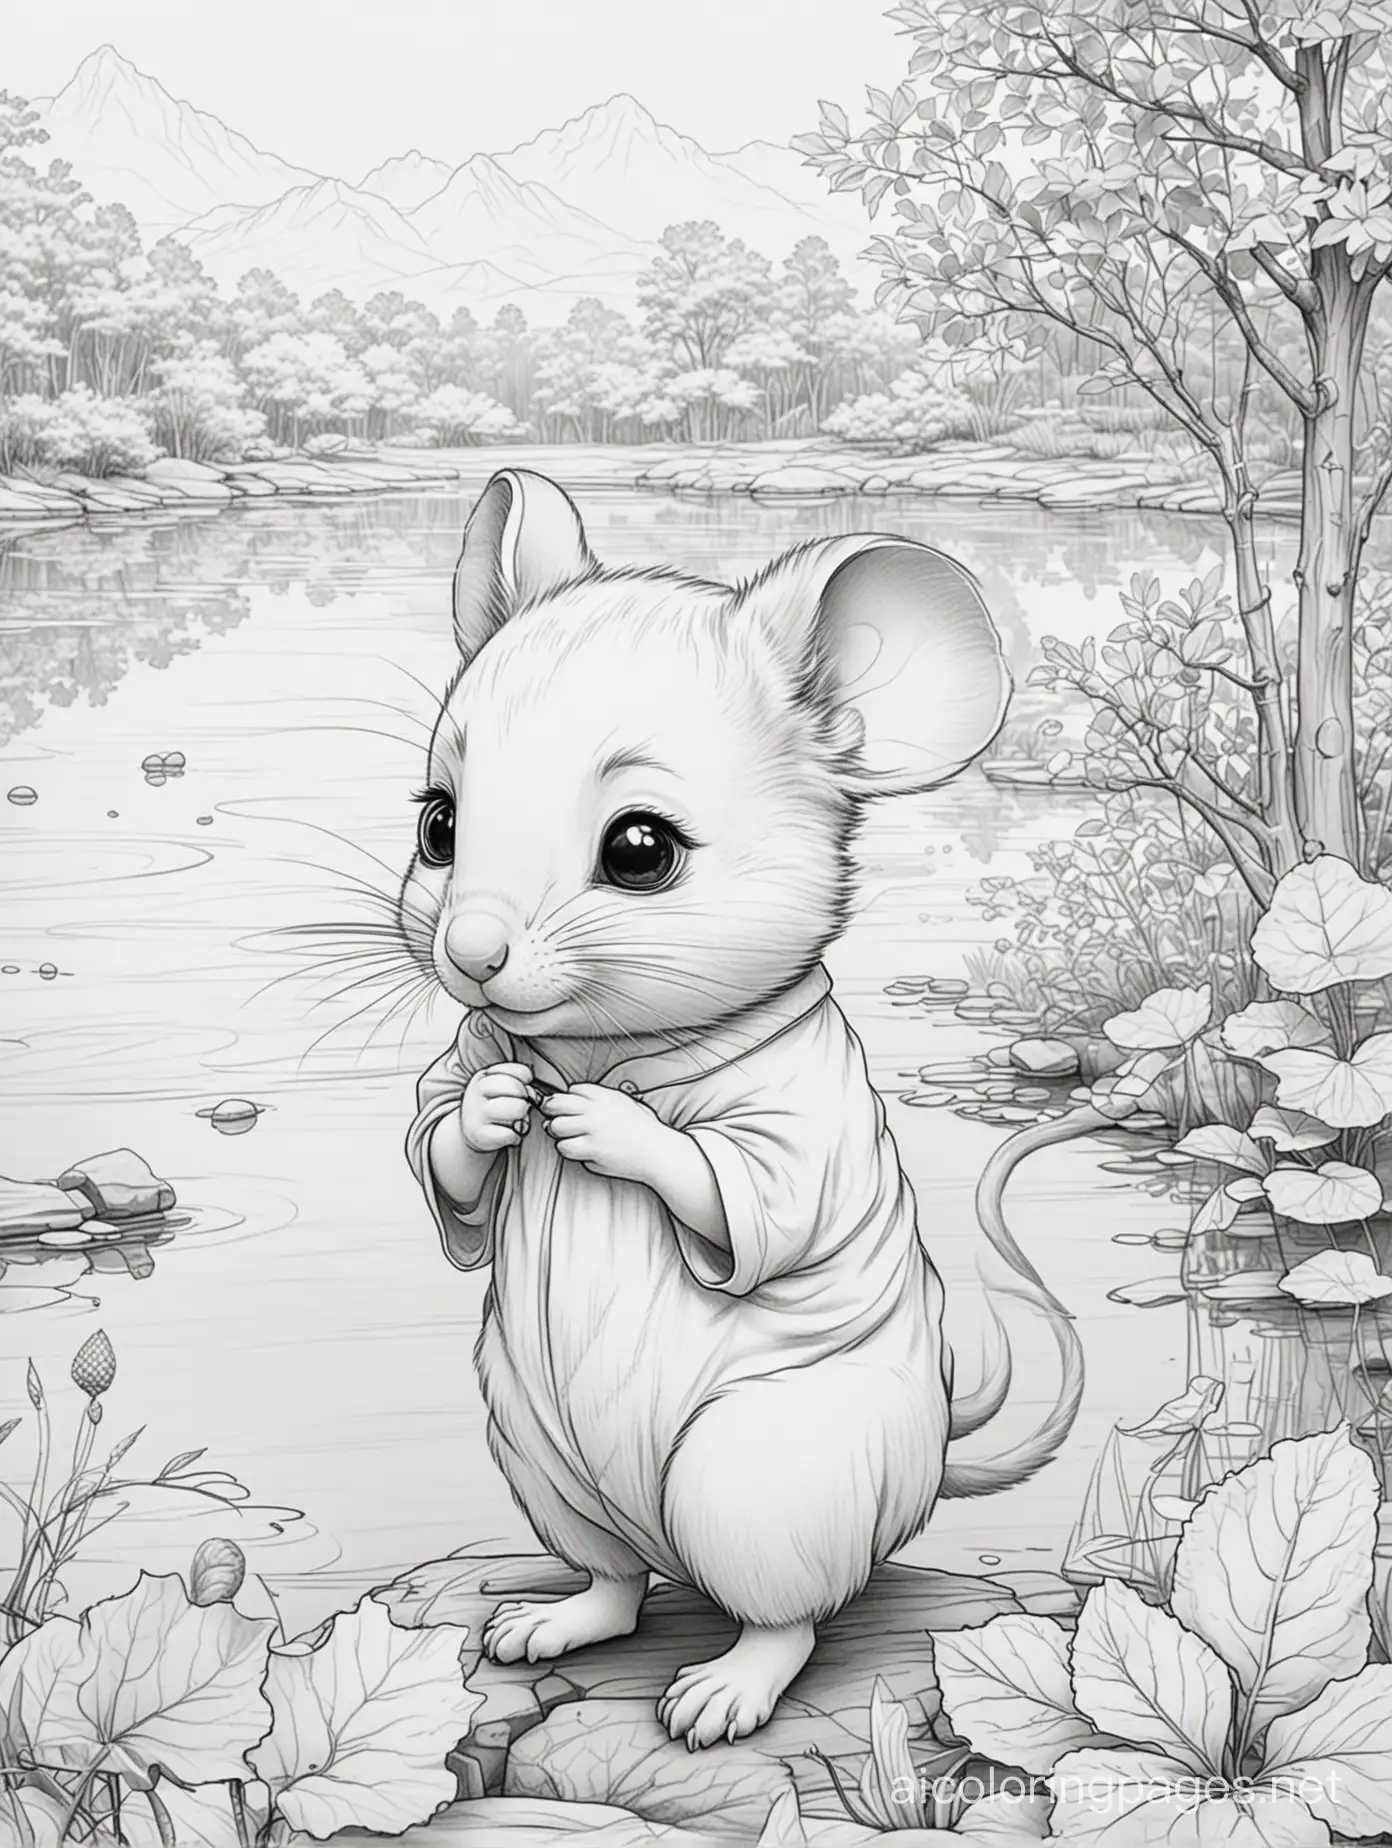 Chibi-Mouse-Coloring-Page-with-Lake-and-Trees